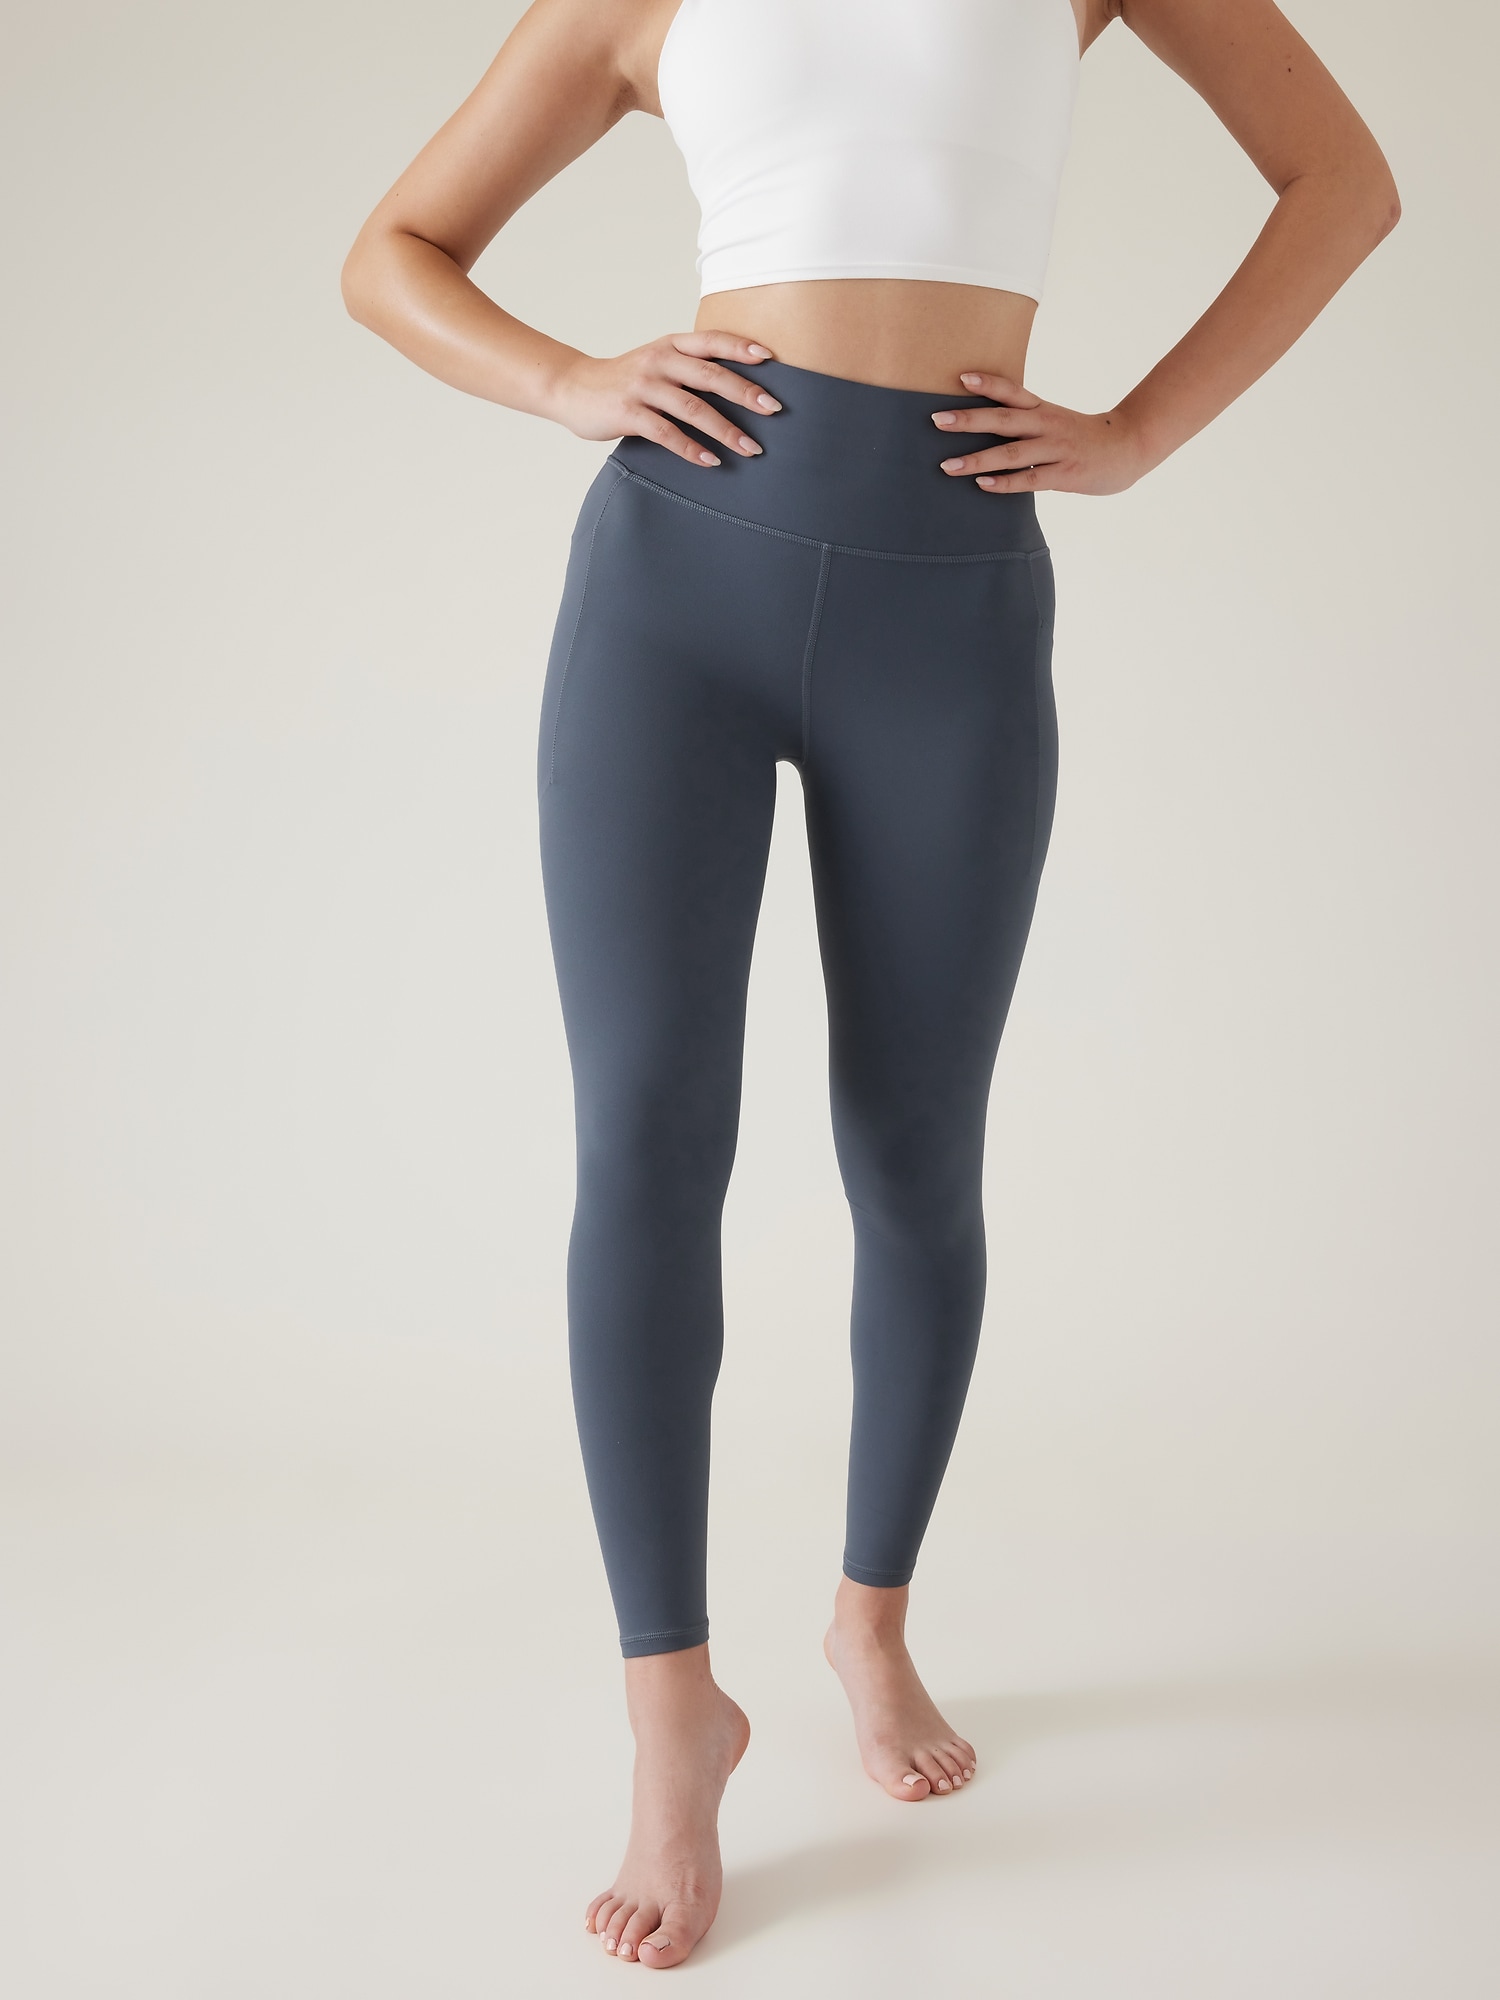 12 Popular Workout Leggings—Reviewed and Ranked! - Home and Kind